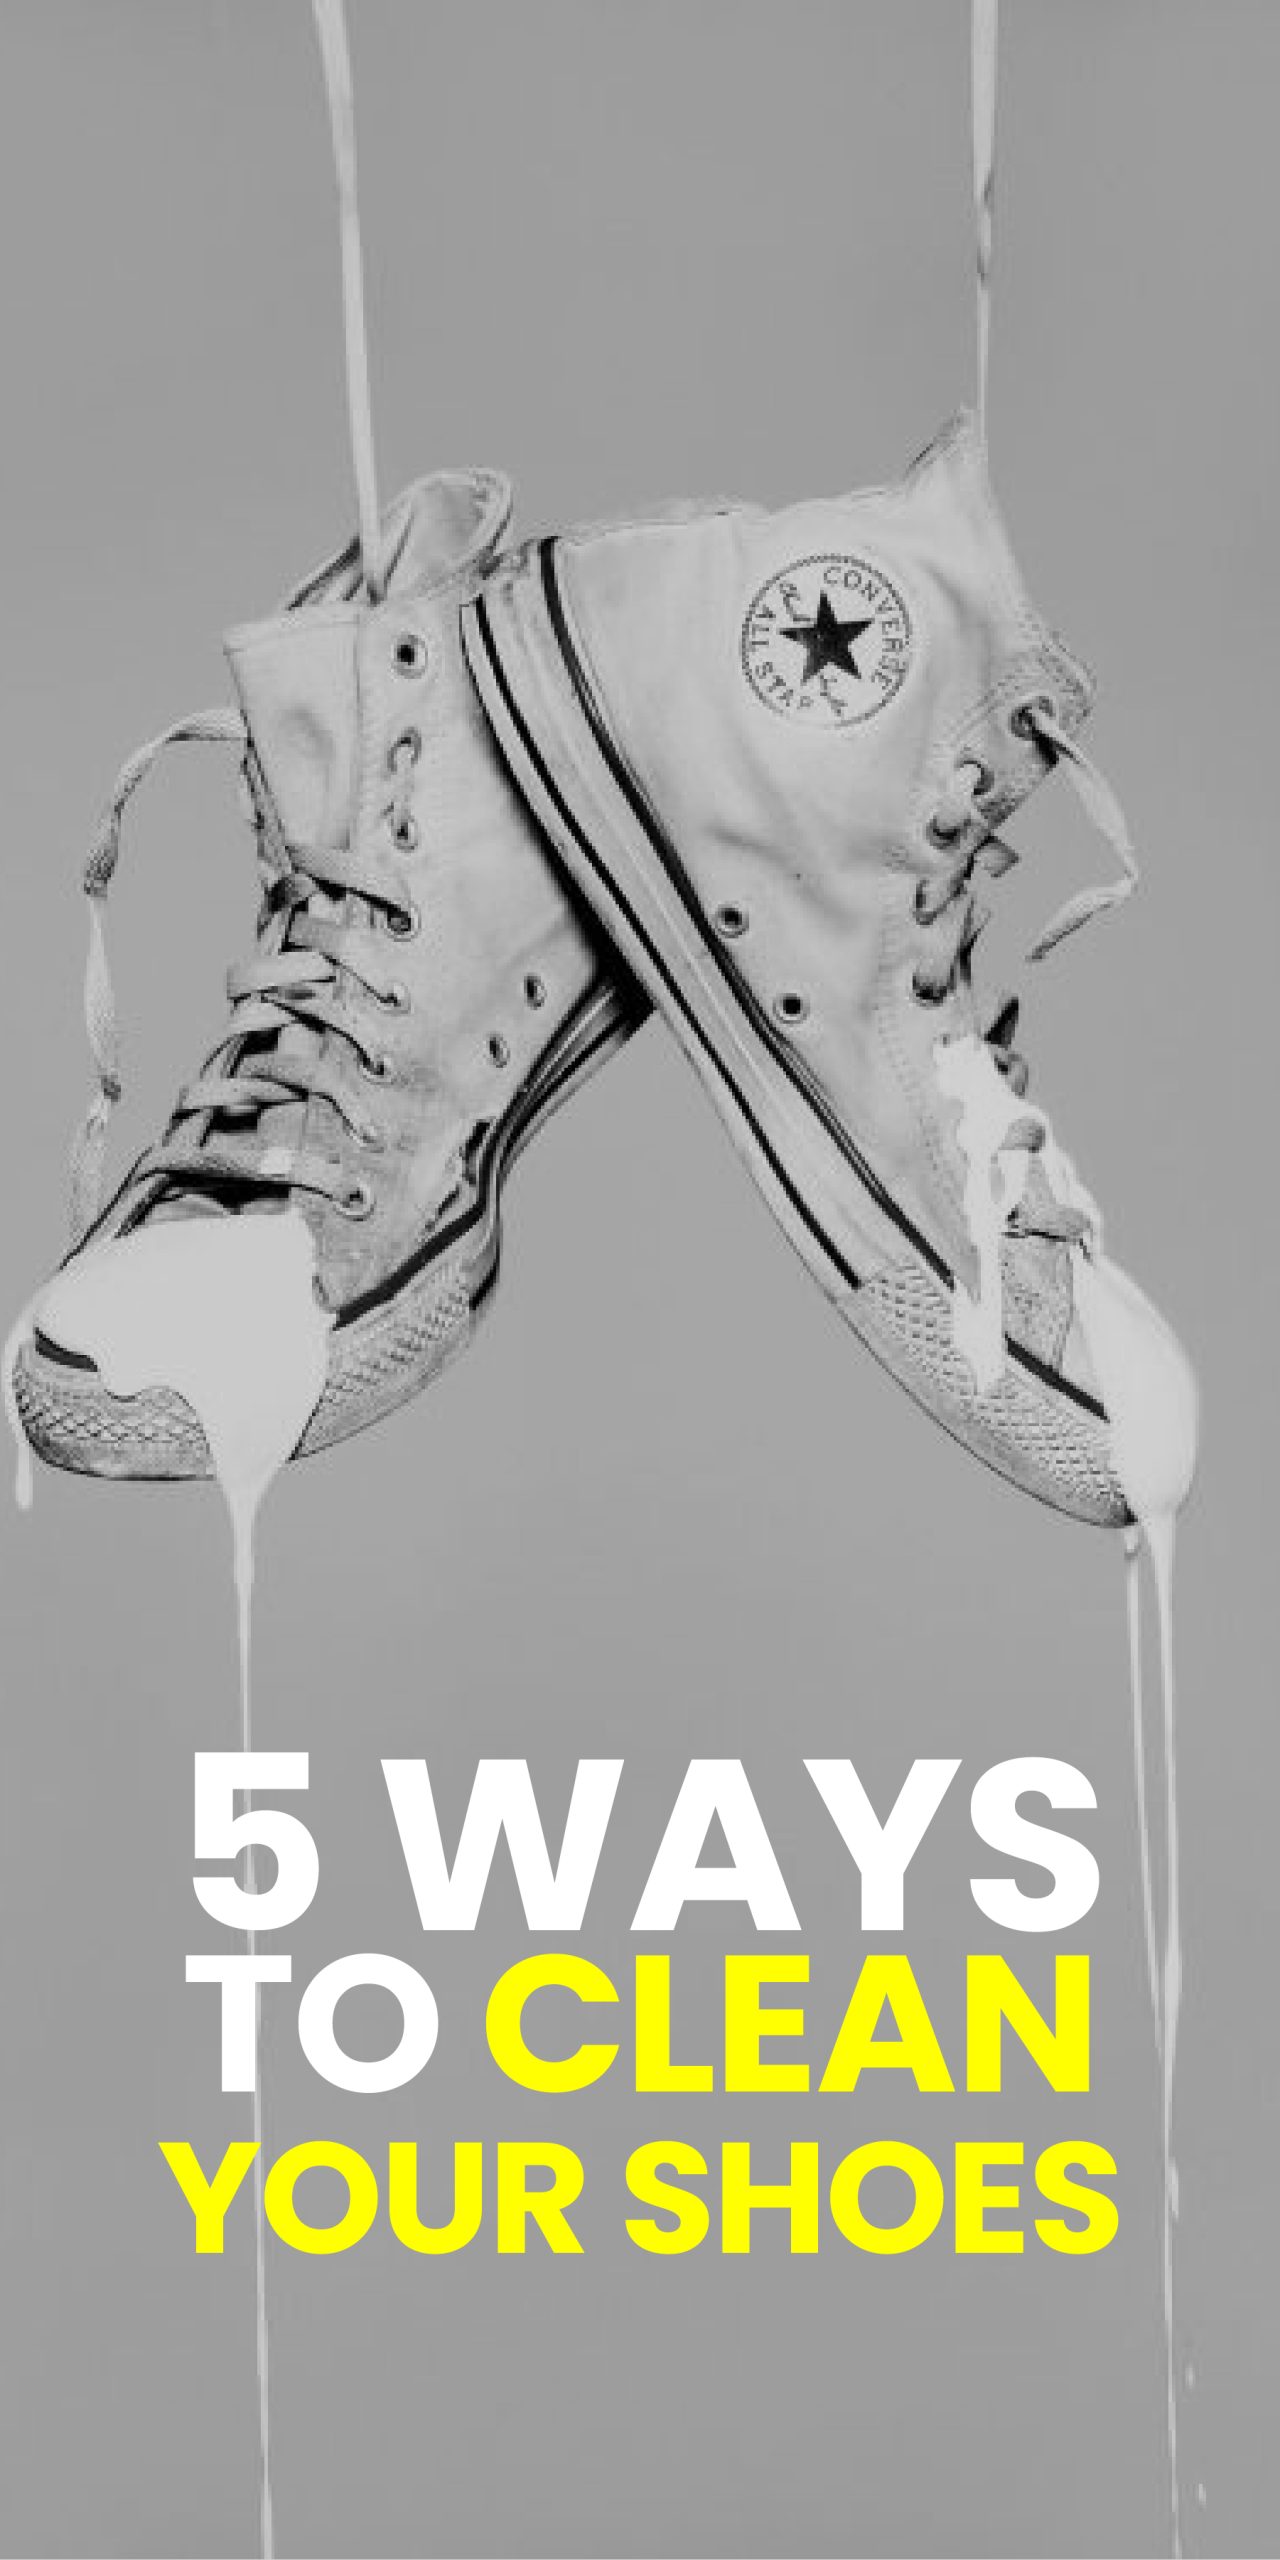 5 WAYS TO CLEAN YOUR SHOES